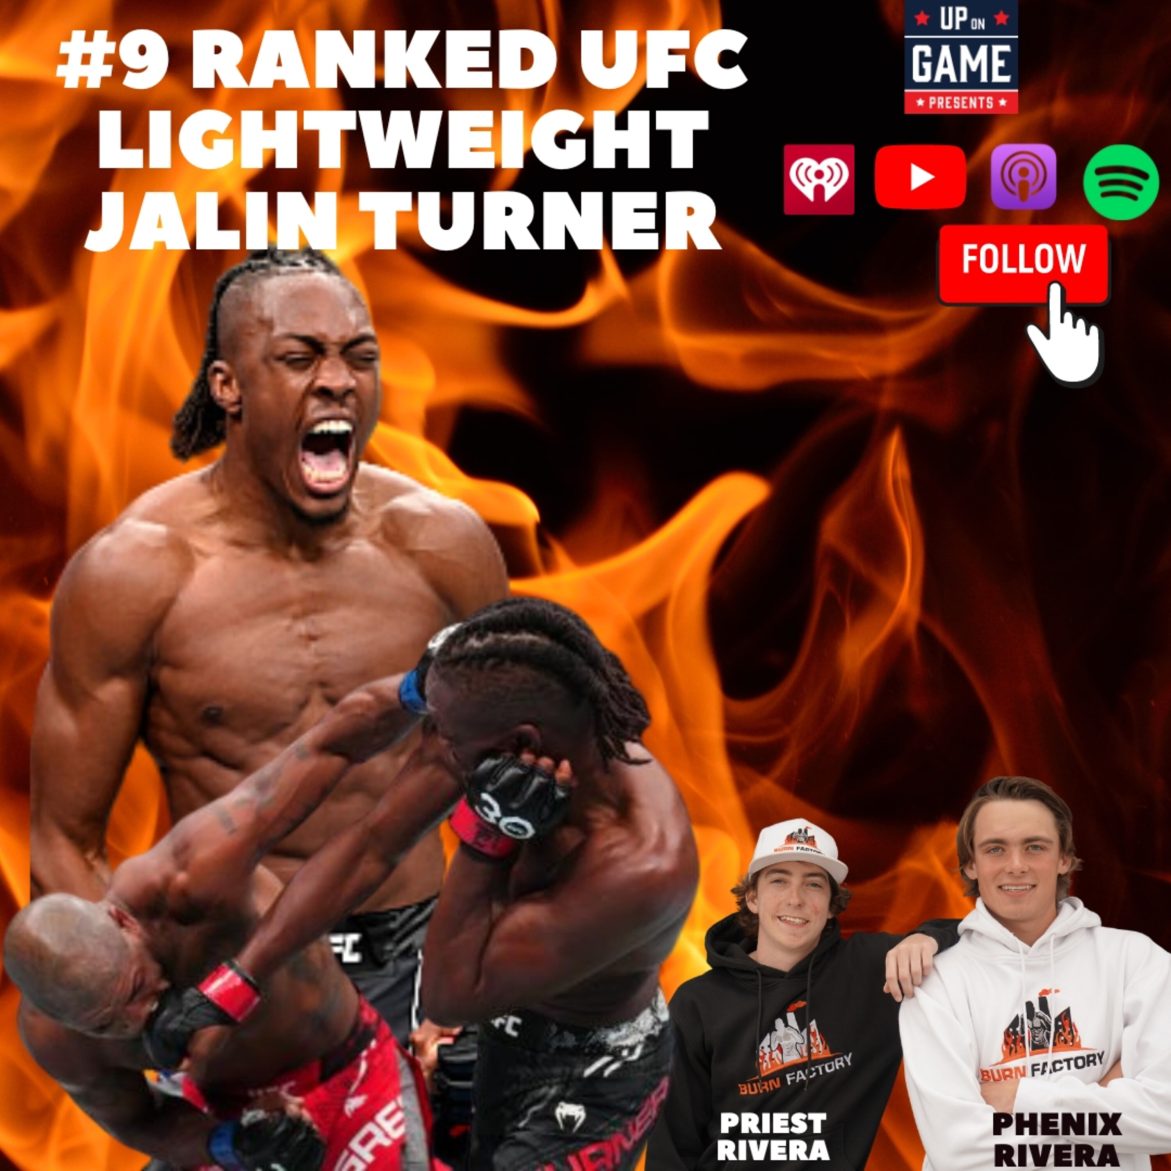 Black Podcasting - UP ON GAME PRESENTS BURN FACTORY PODCAST Featuring #9 Ranked UFC Lightweight Jalin Turner